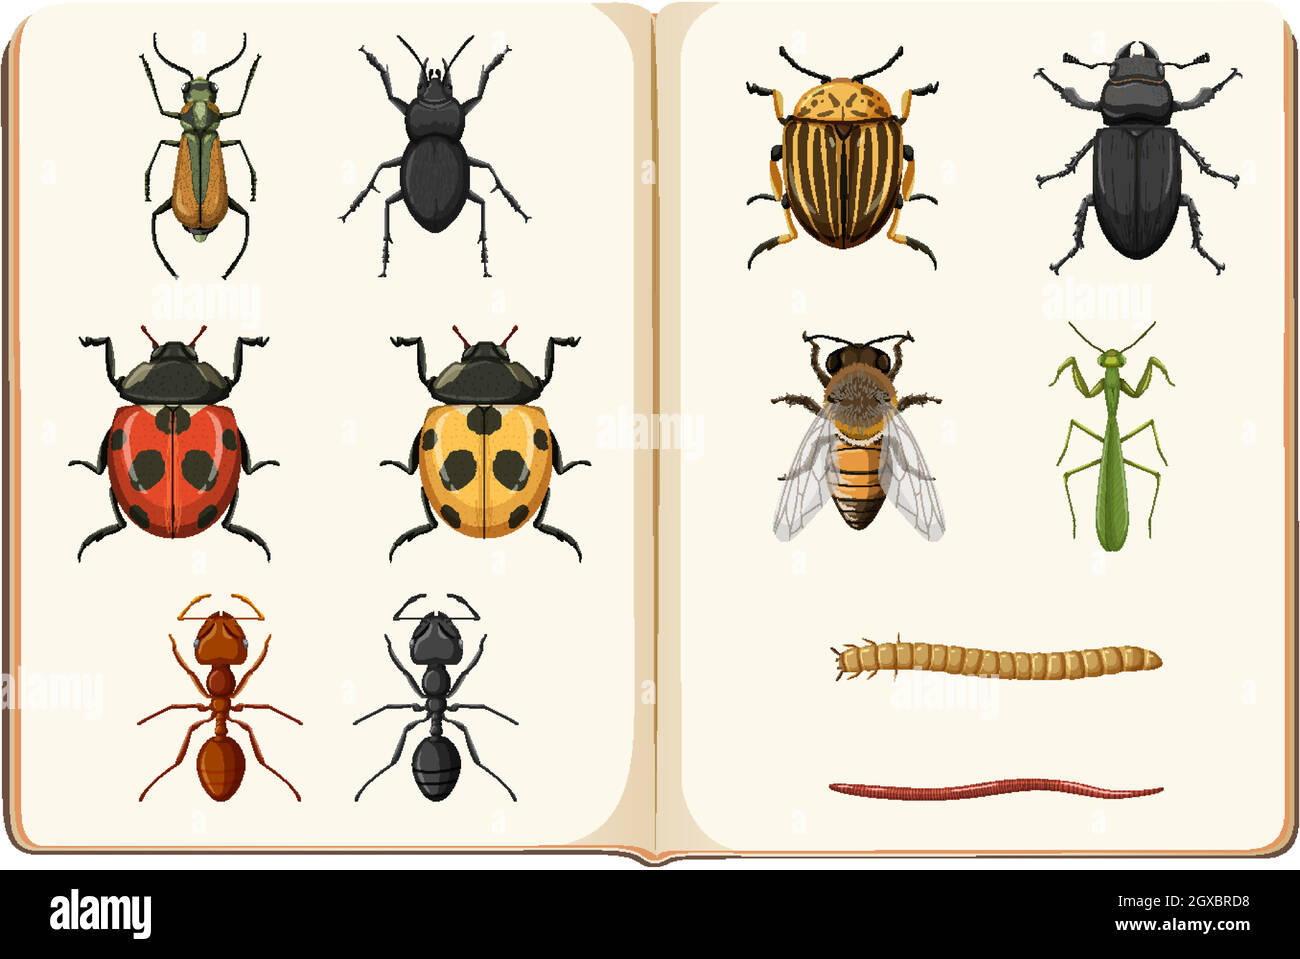 Entomology list of insect collection Stock Vector